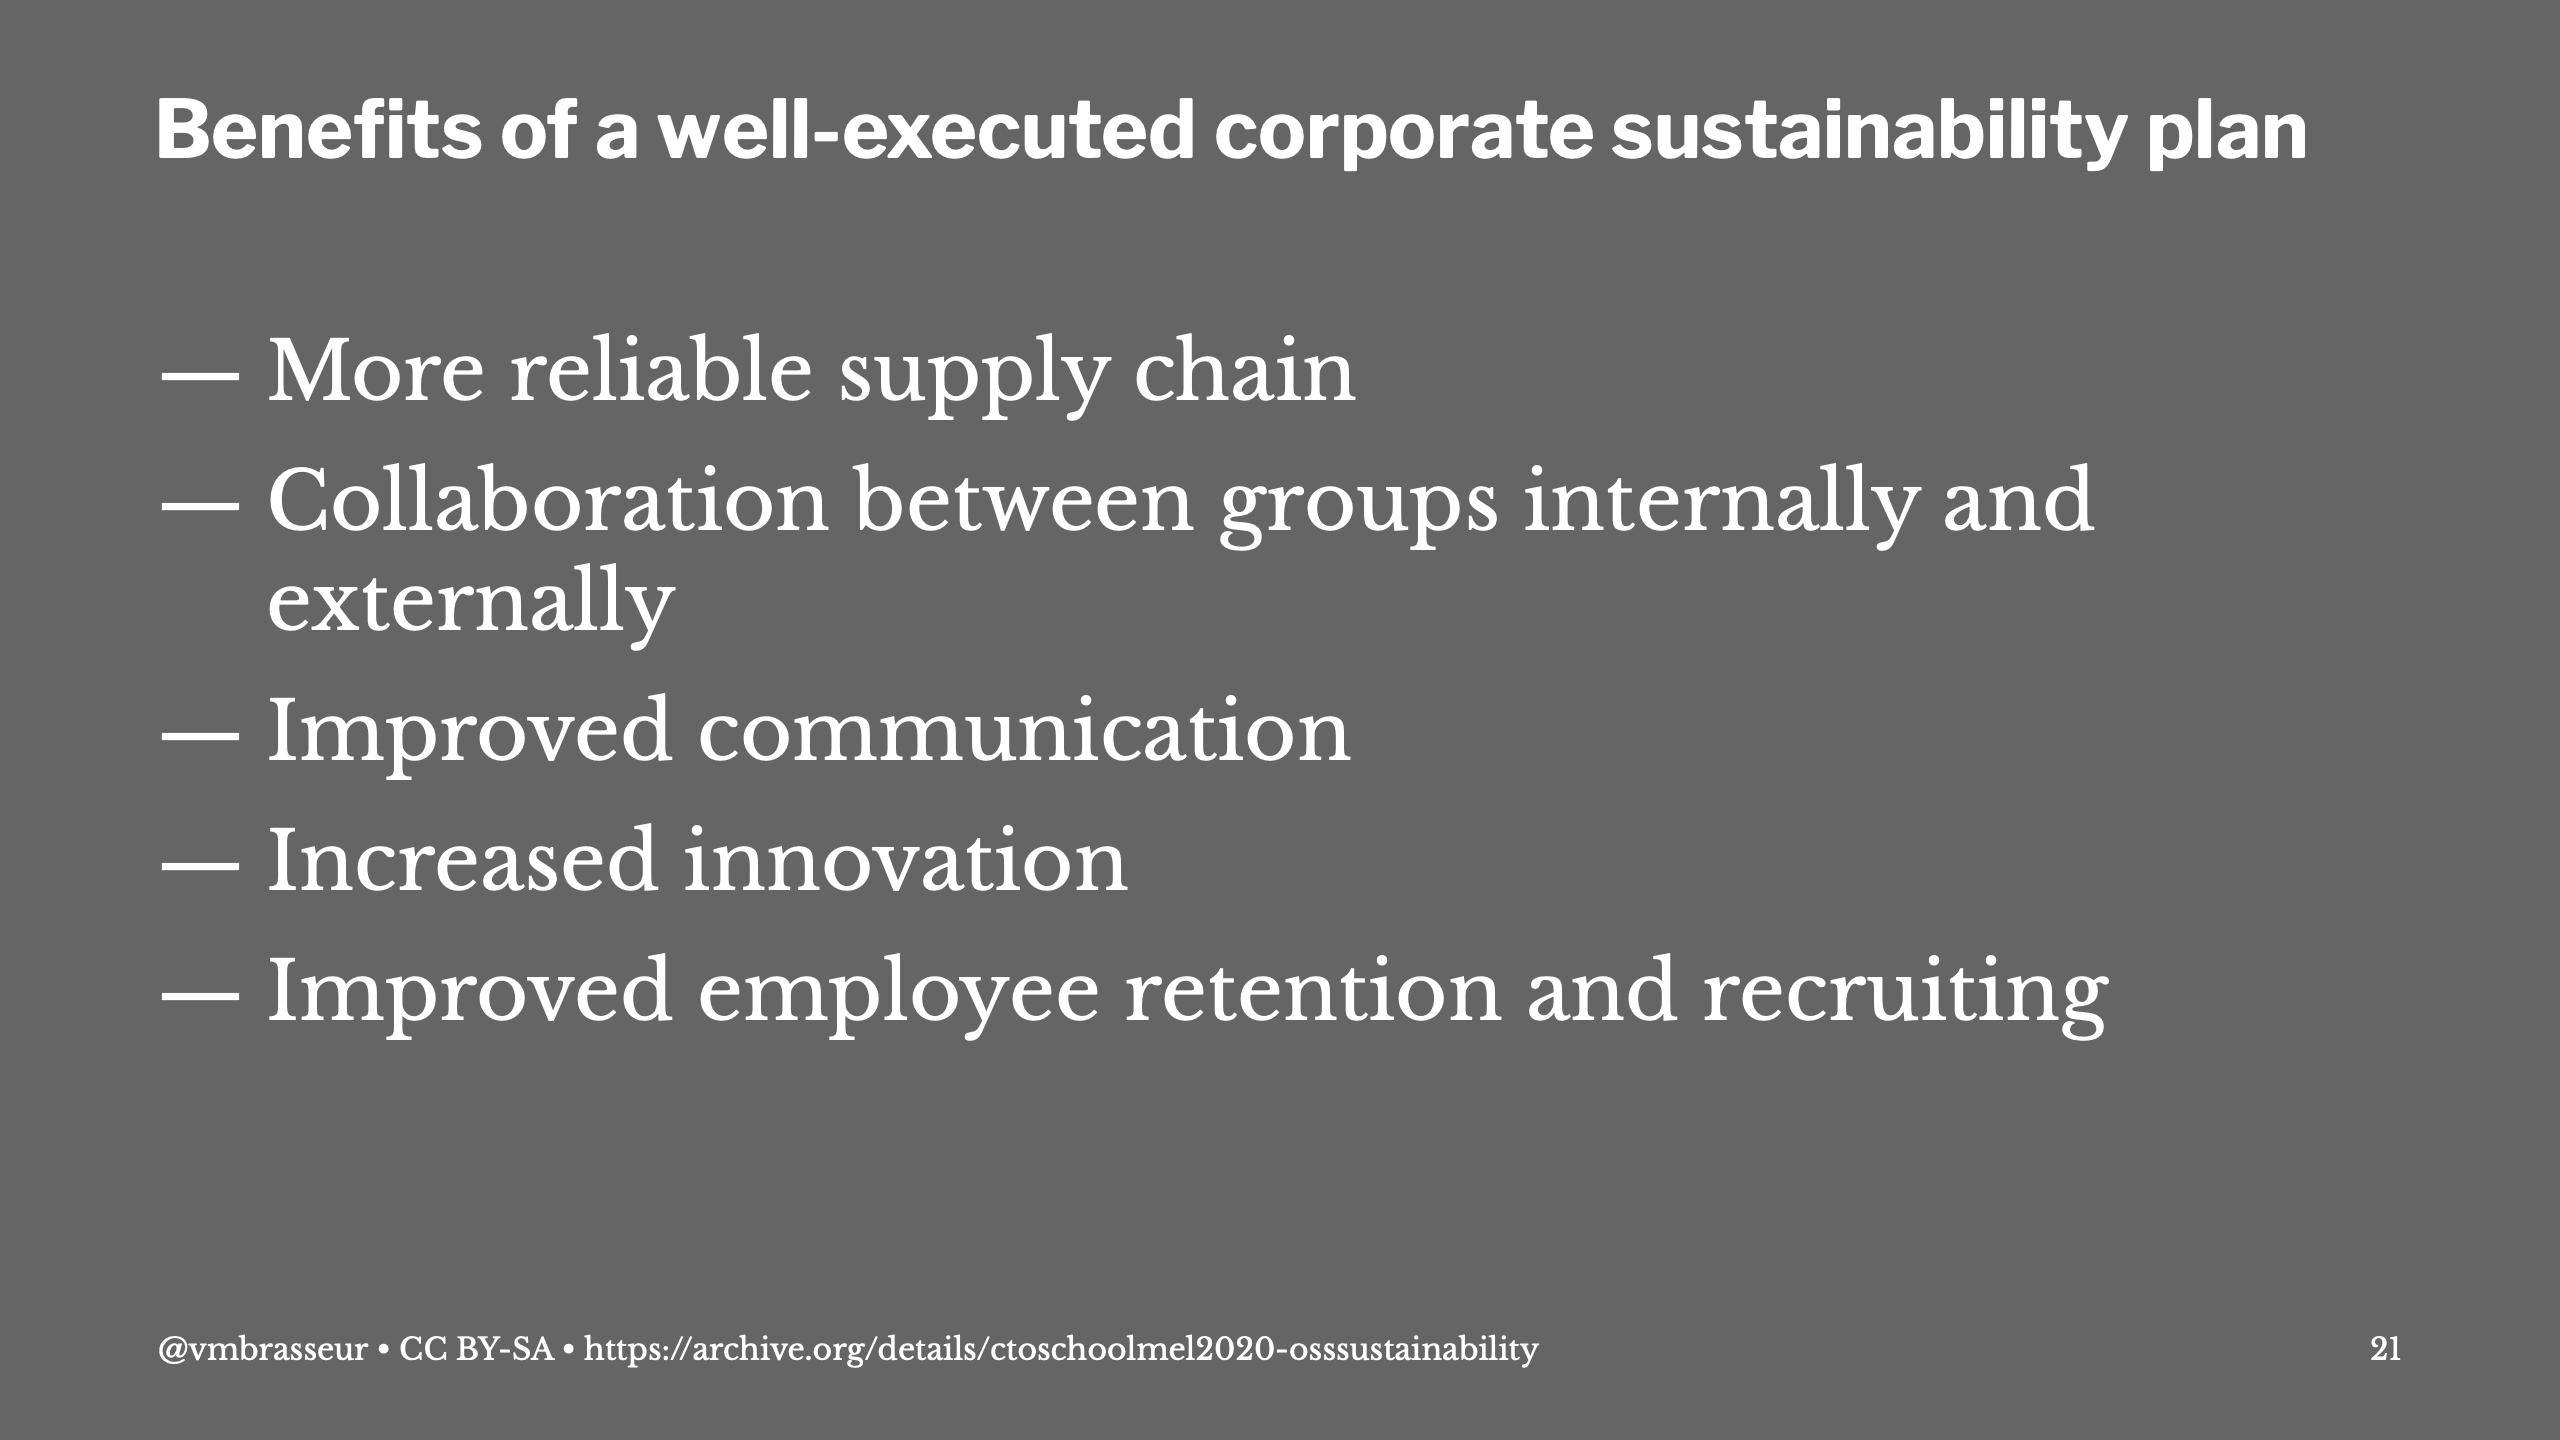 Benefits of a well-executed corporate sustainability plan: More reliable supply chain, collaboration between groups internally and externally, improved communication, increased innovation, improved employee retention and recruiting